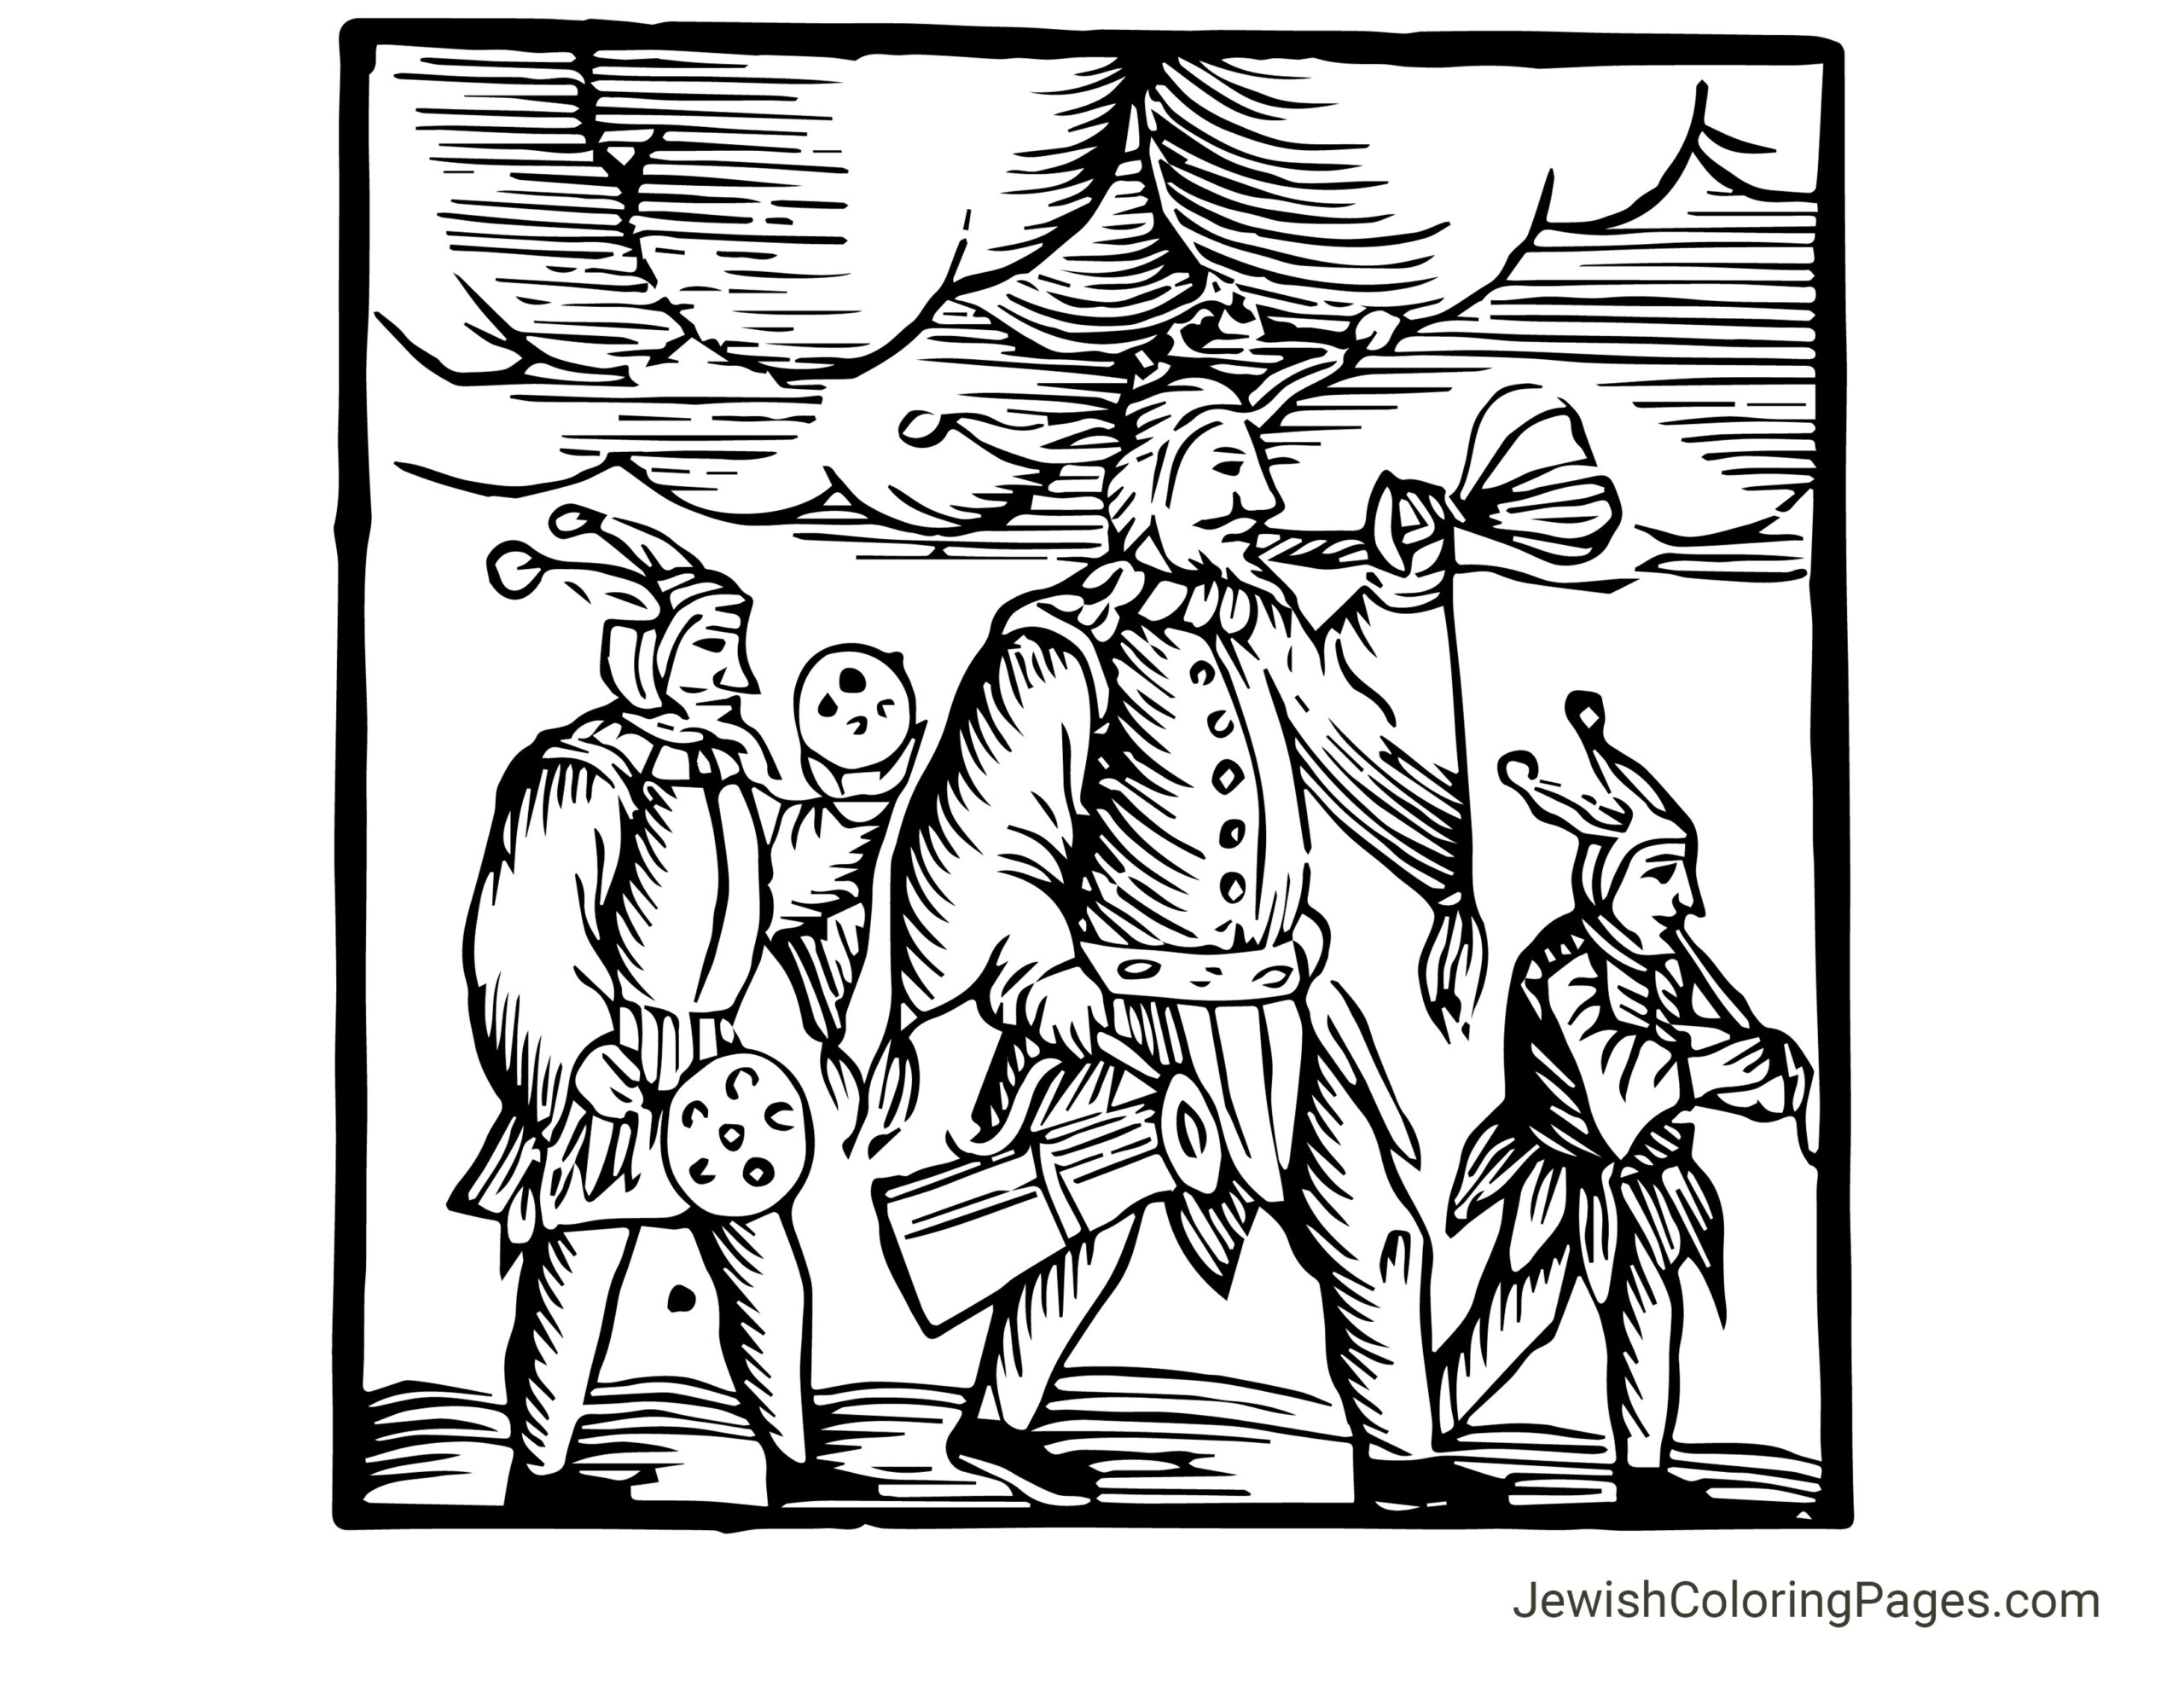 This is a stylized representation of a scene based on a 1657 woodcut, which depicts a medieval Purim celebration. The central figure in the scene is dressed in regal, somewhat exaggerated attire, characteristic of the period's sense of fashion, which included puffed sleeves, a prominent ruff, and a large hat. This costume likely represents King Ahasuerus, from the Book of Esther, which is read during the Jewish festival of Purim. Flanking the king are two other figures, possibly meant to portray court jesters or characters from the Purim story, such as Mordecai and Haman. These characters are dressed in costumes that are similarly indicative of the era, with one carrying what appears to be a noise maker, known as a "grogger" in the context of Purim, used to drown out Haman's name during the reading of the Megillah. Historical Medieval Purim Engraving Free Printable Coloring Page copy